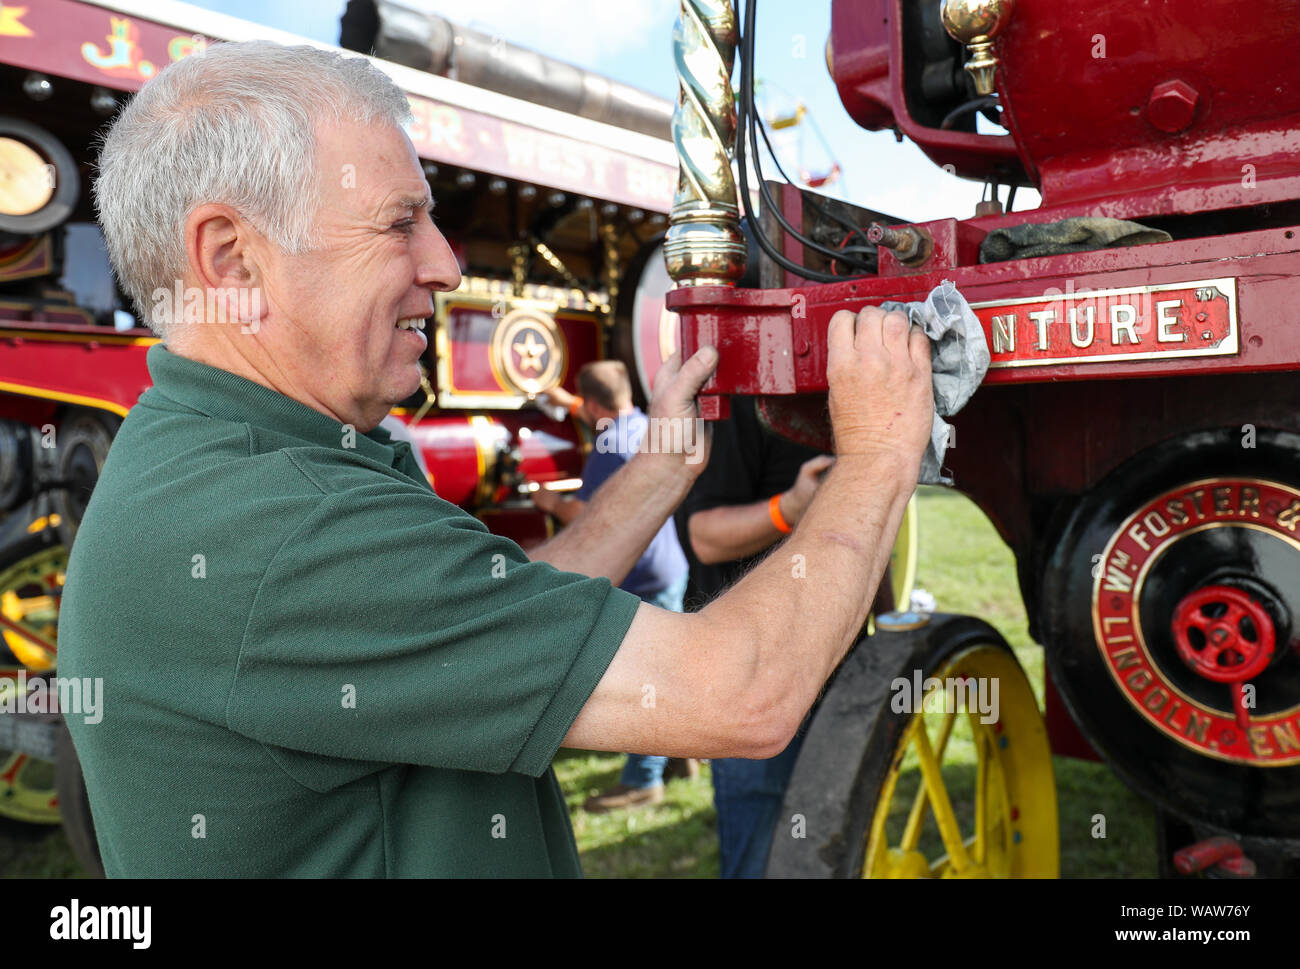 Alan Rundle from Lincolnshire, polishes the name plaque of his families Foster Showmans Tractor 'Venture', at the Great Dorset Steam Fair, where hundreds of period steam traction engines and heavy mechanical equipment from all eras gather to showcase Great Britain's rich industrial, agricultural and leisure history, at the annual show taking place over the August Bank Holiday weekend from Thursday 22nd to Monday 26th August. Stock Photo